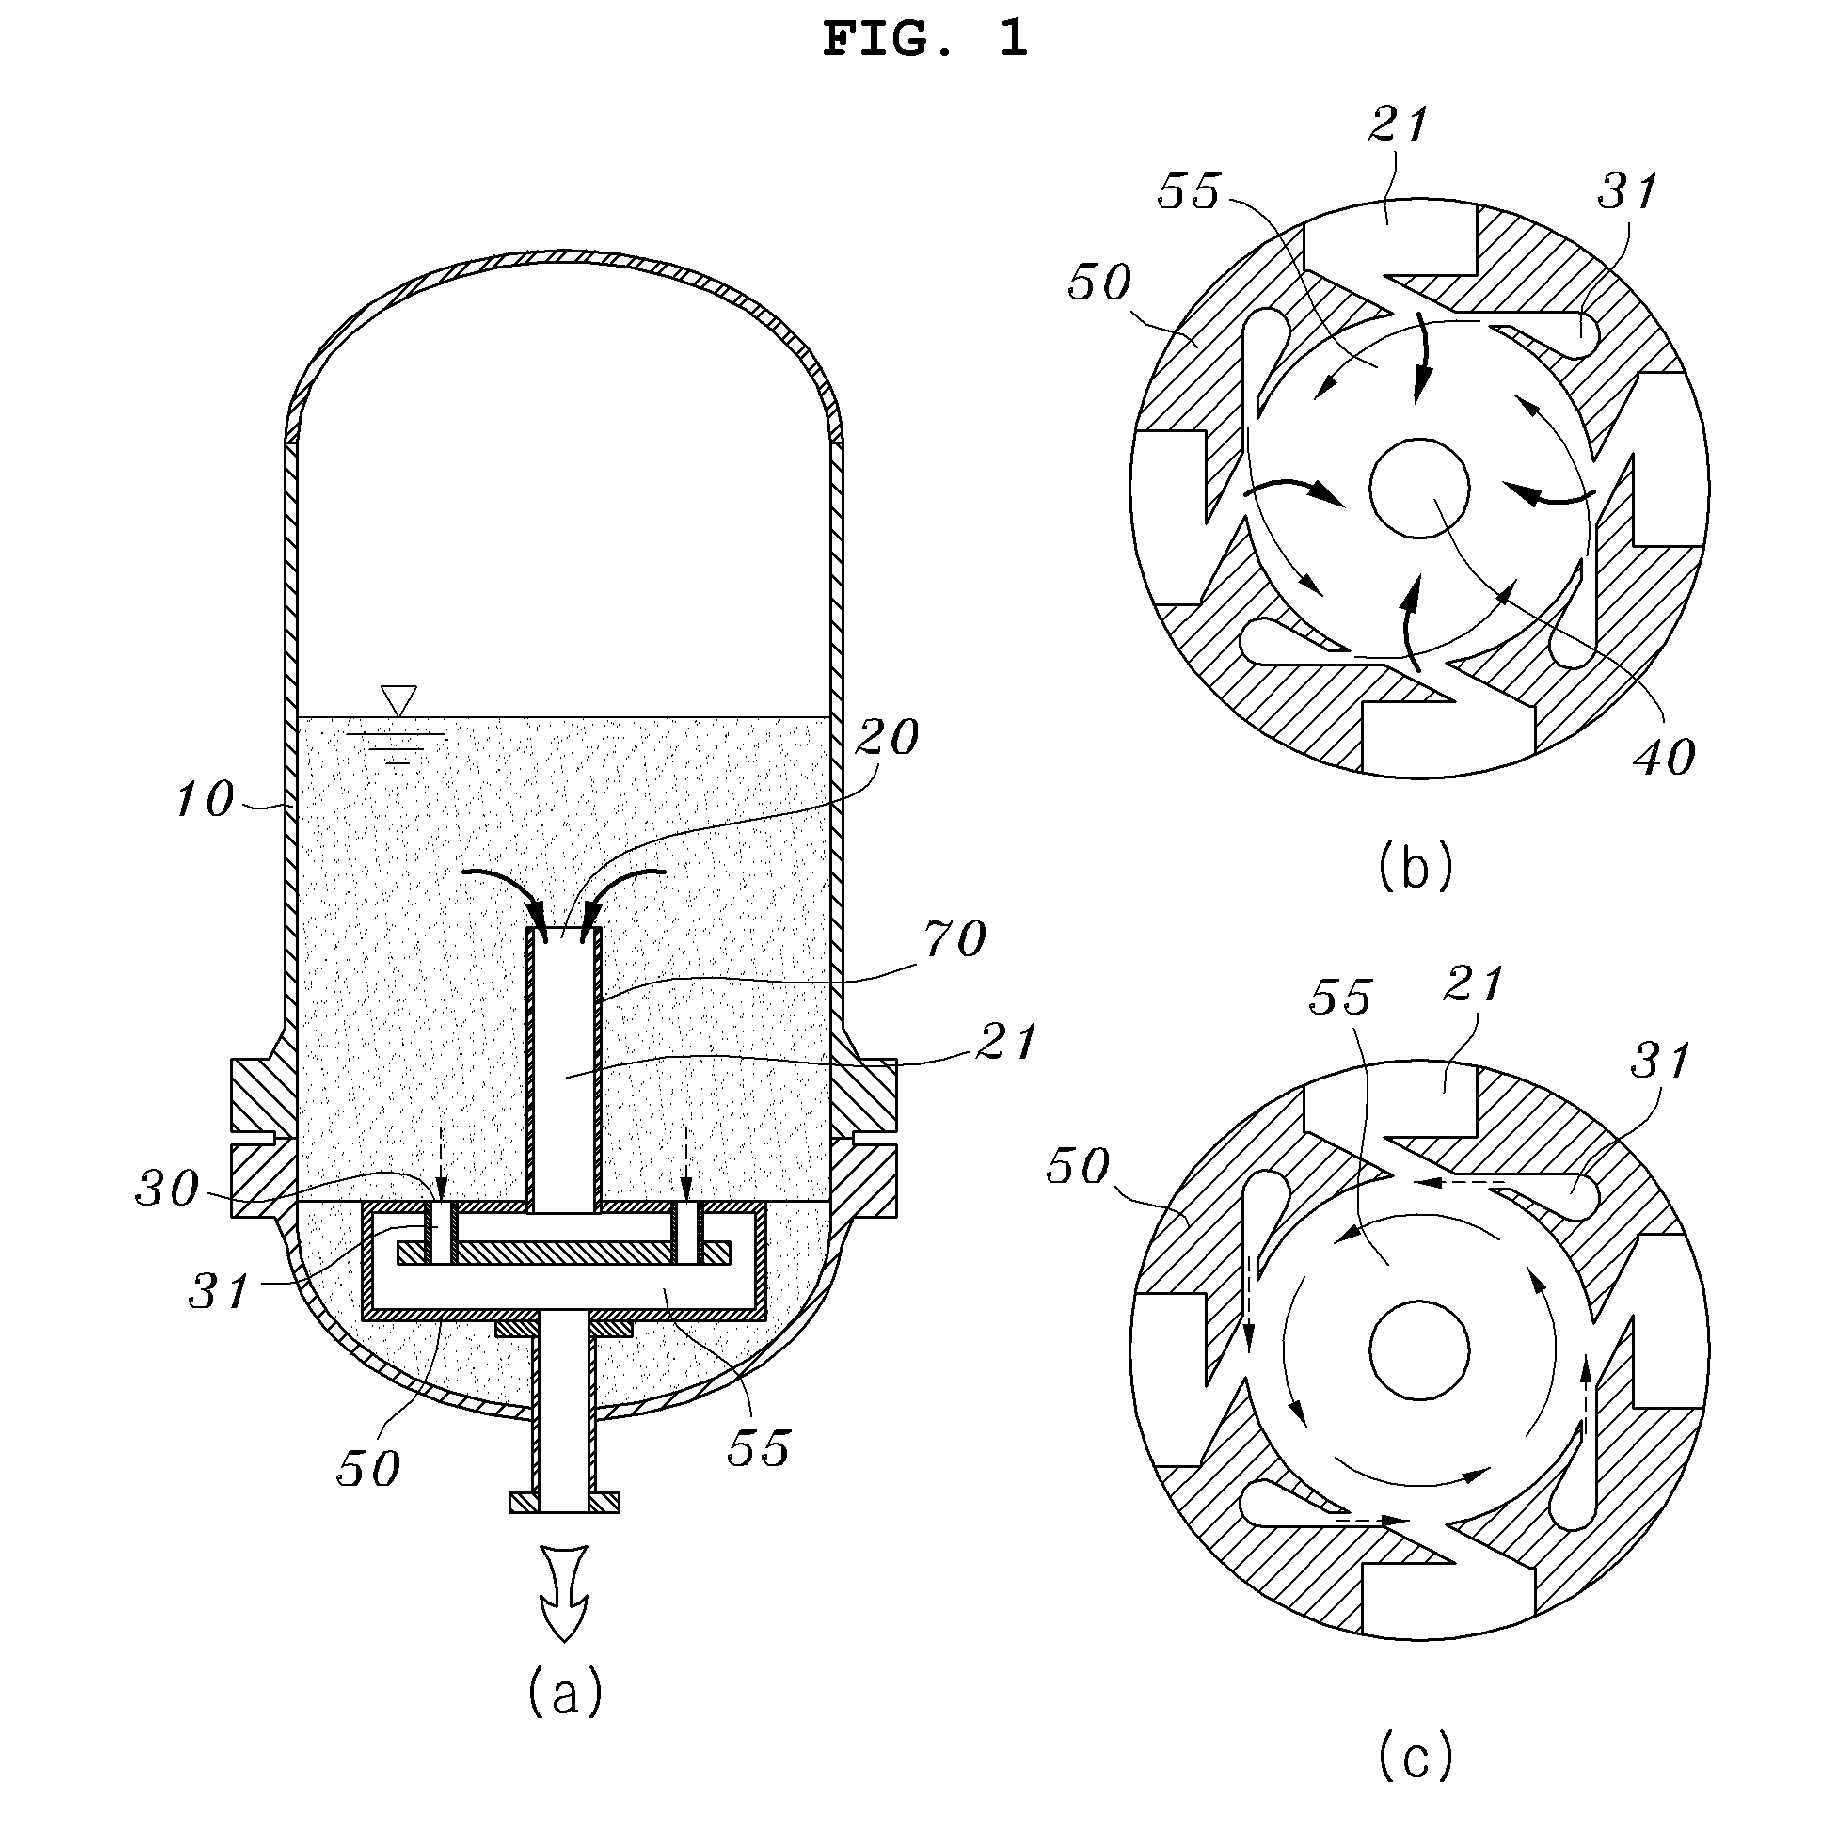 Safety injection tank with gravity driven fluidic device